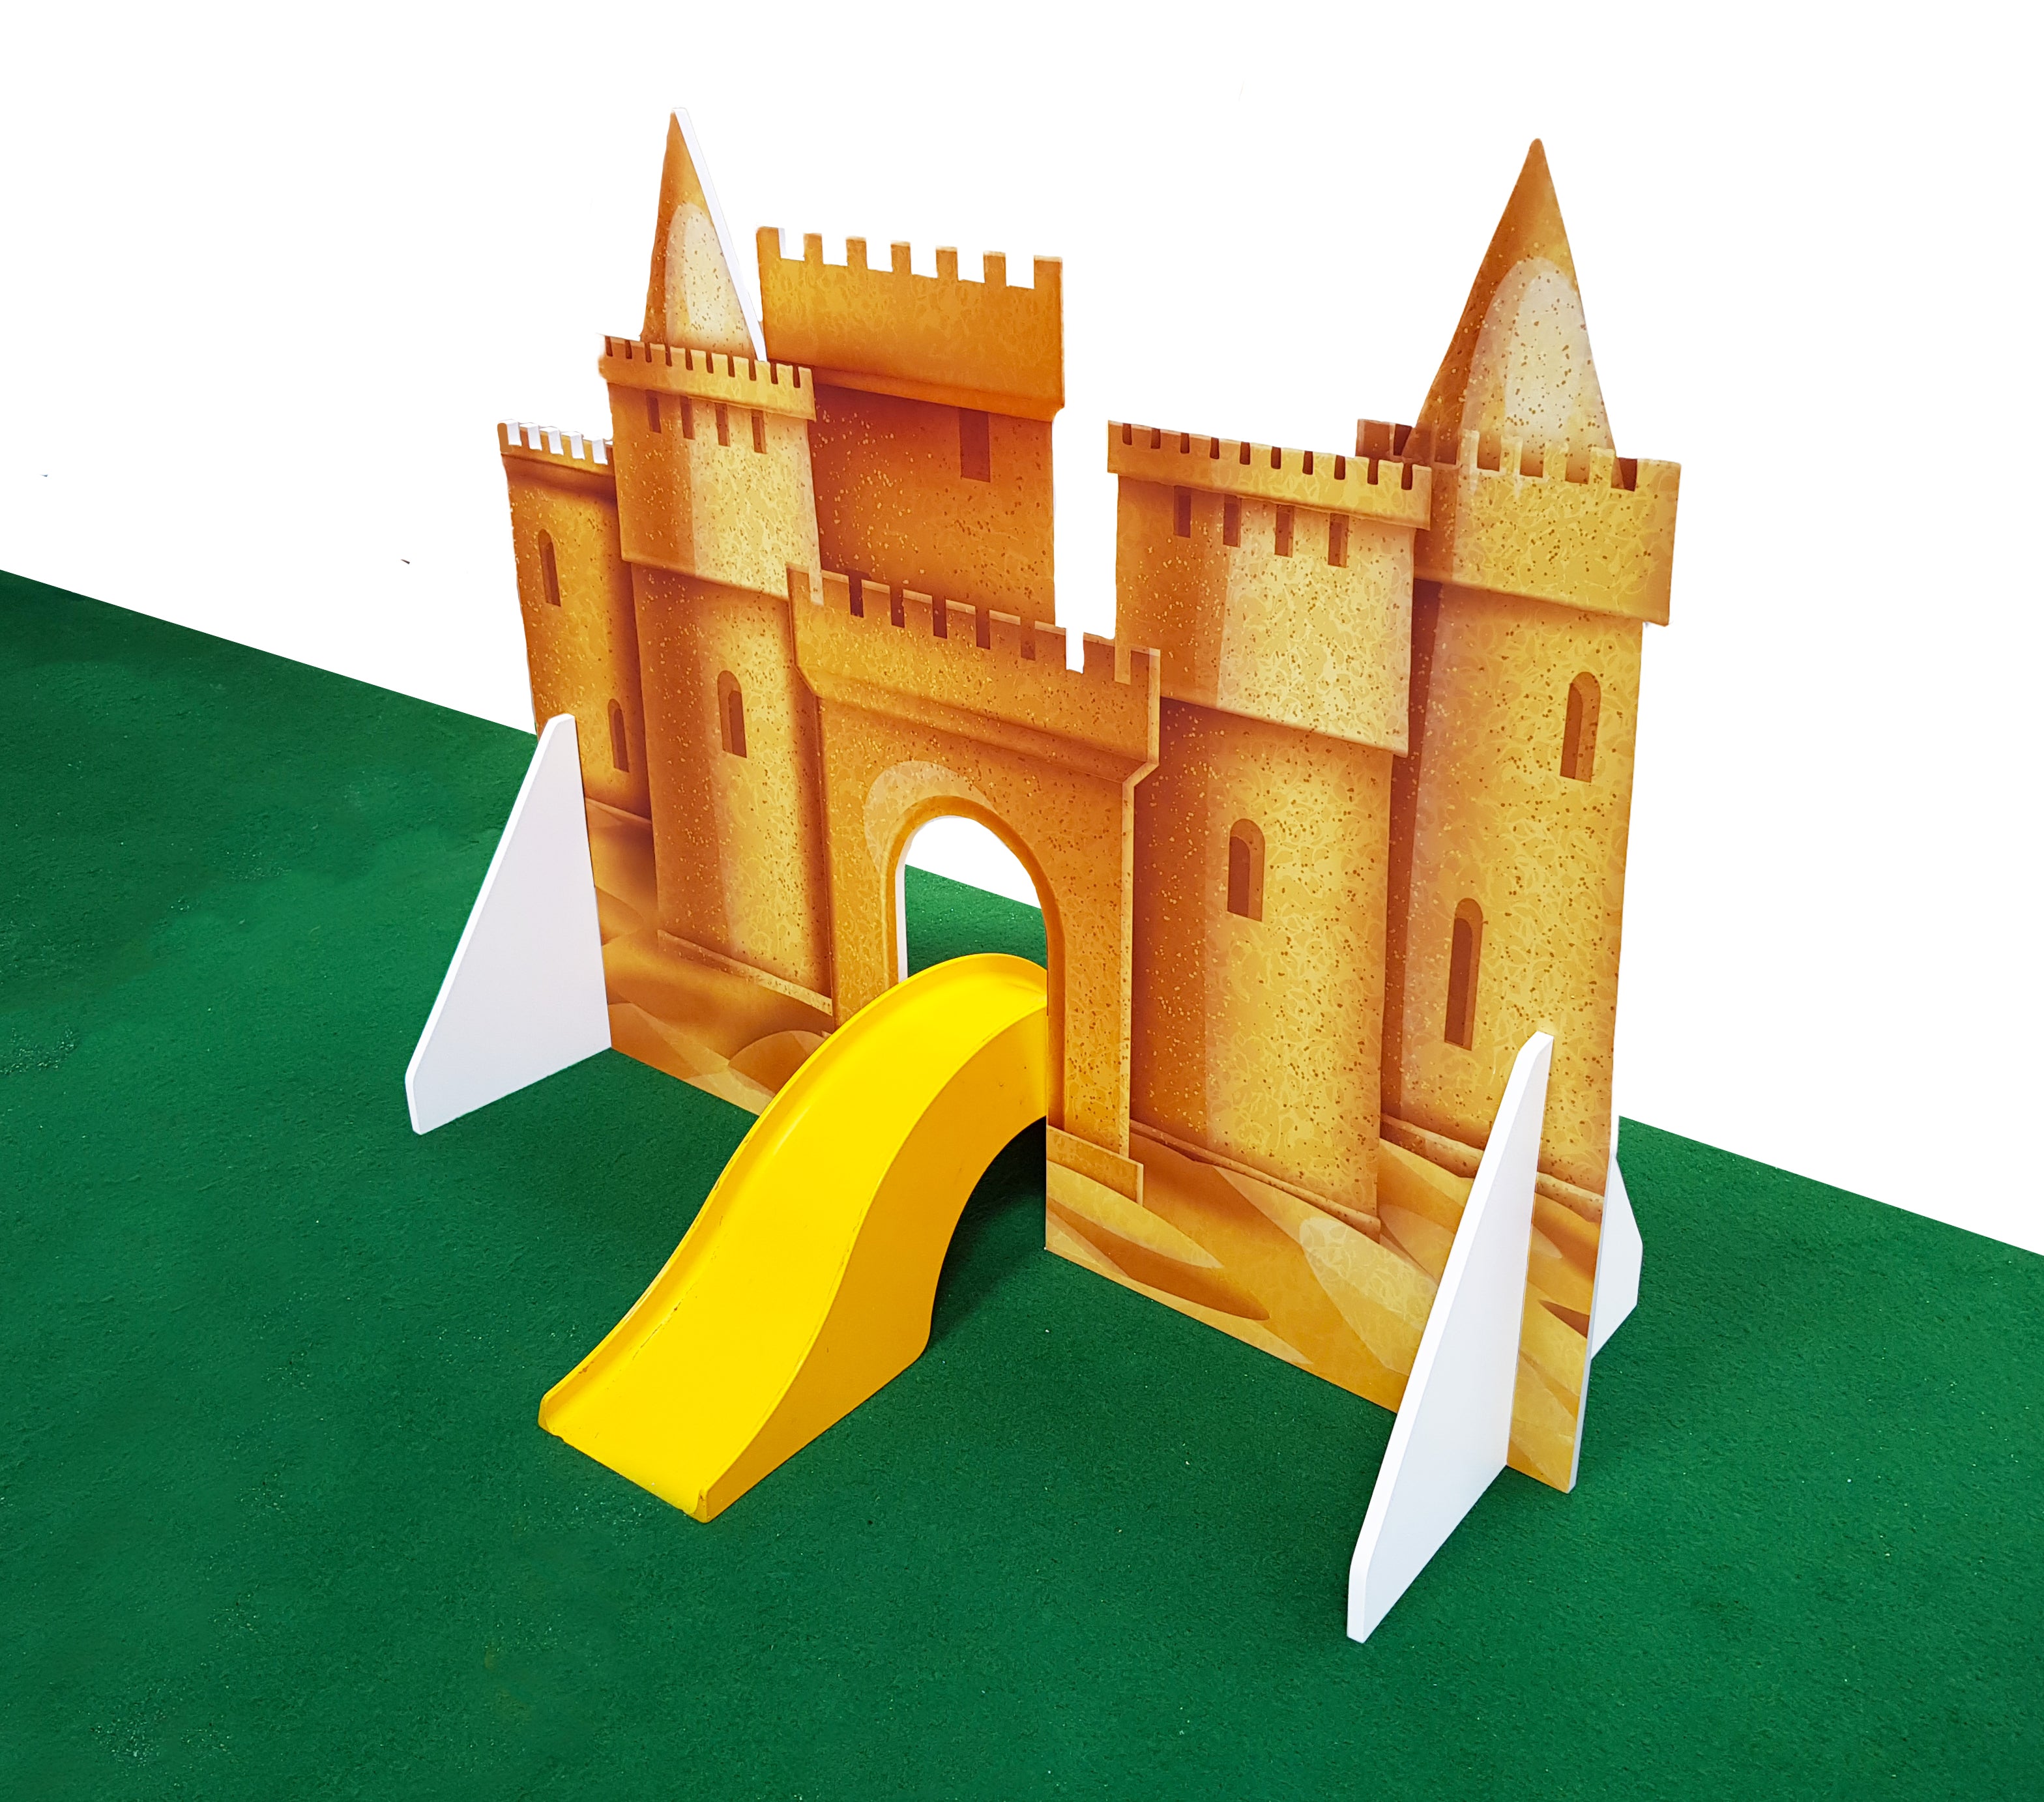 Sandcastle and Bridge Obstacle